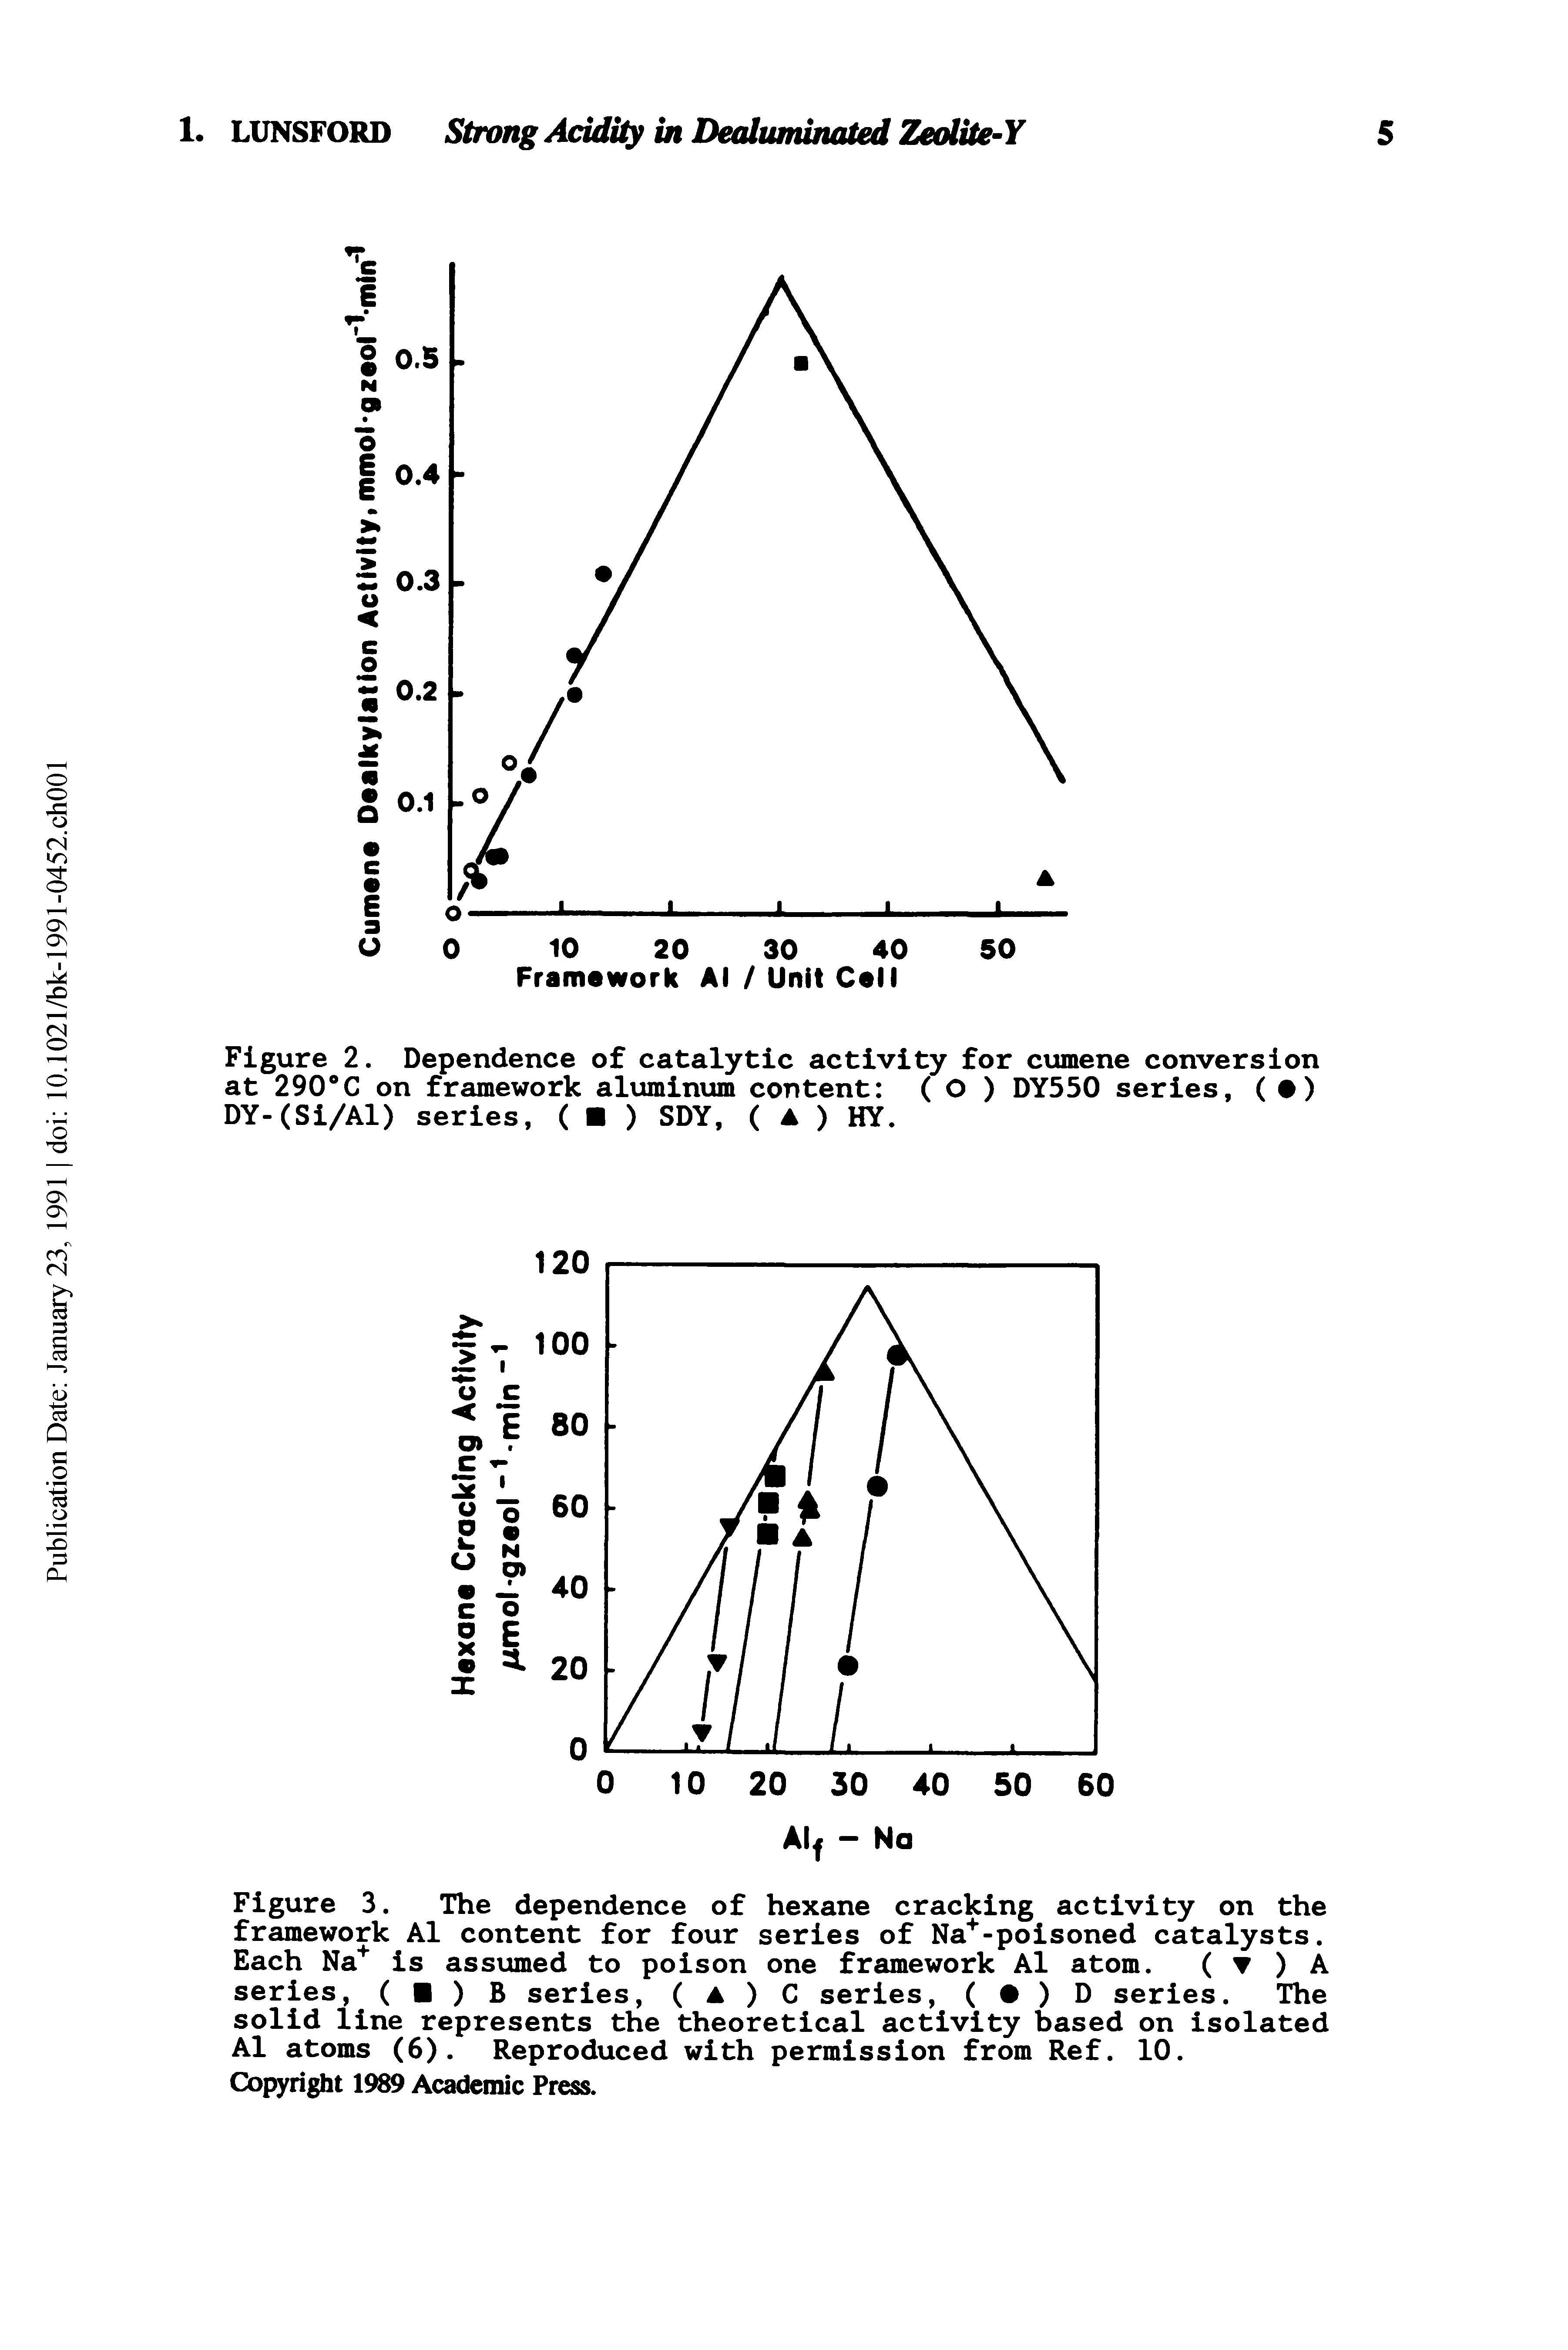 Figure 2. Dependence of catalytic activity for cumene conversion at 290°C on framework aluminum content ( O ) DY550 series, ( ) DY-(Si/Al) series, ( ) SDY, ( A ) HY.